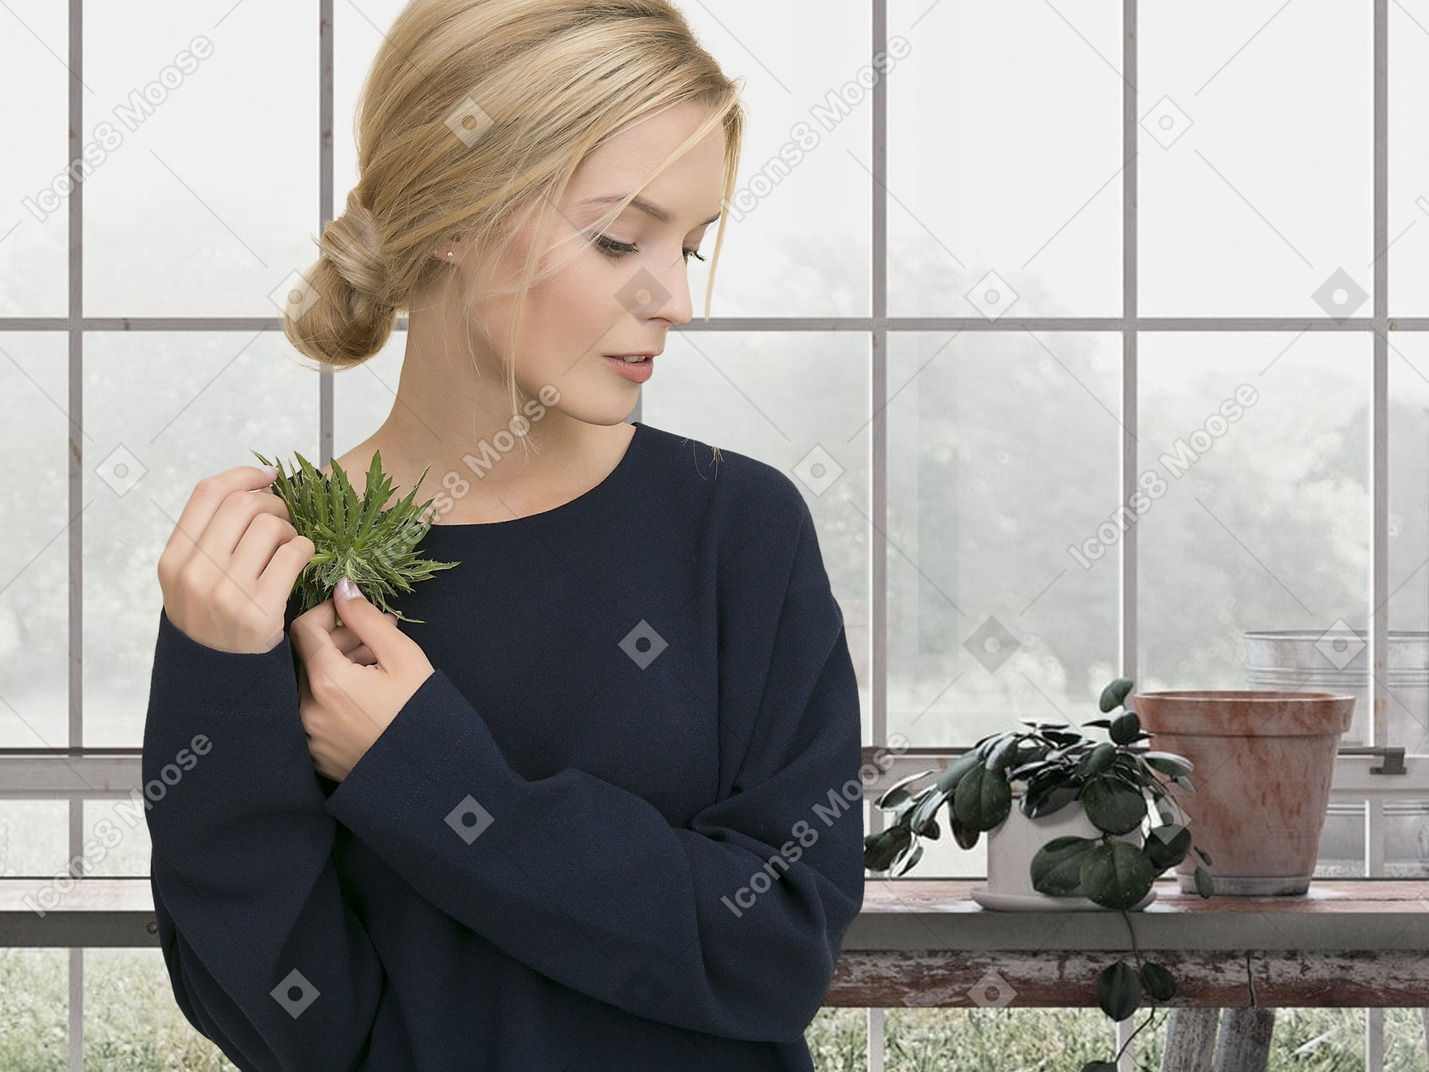 A woman holding a plant near her face